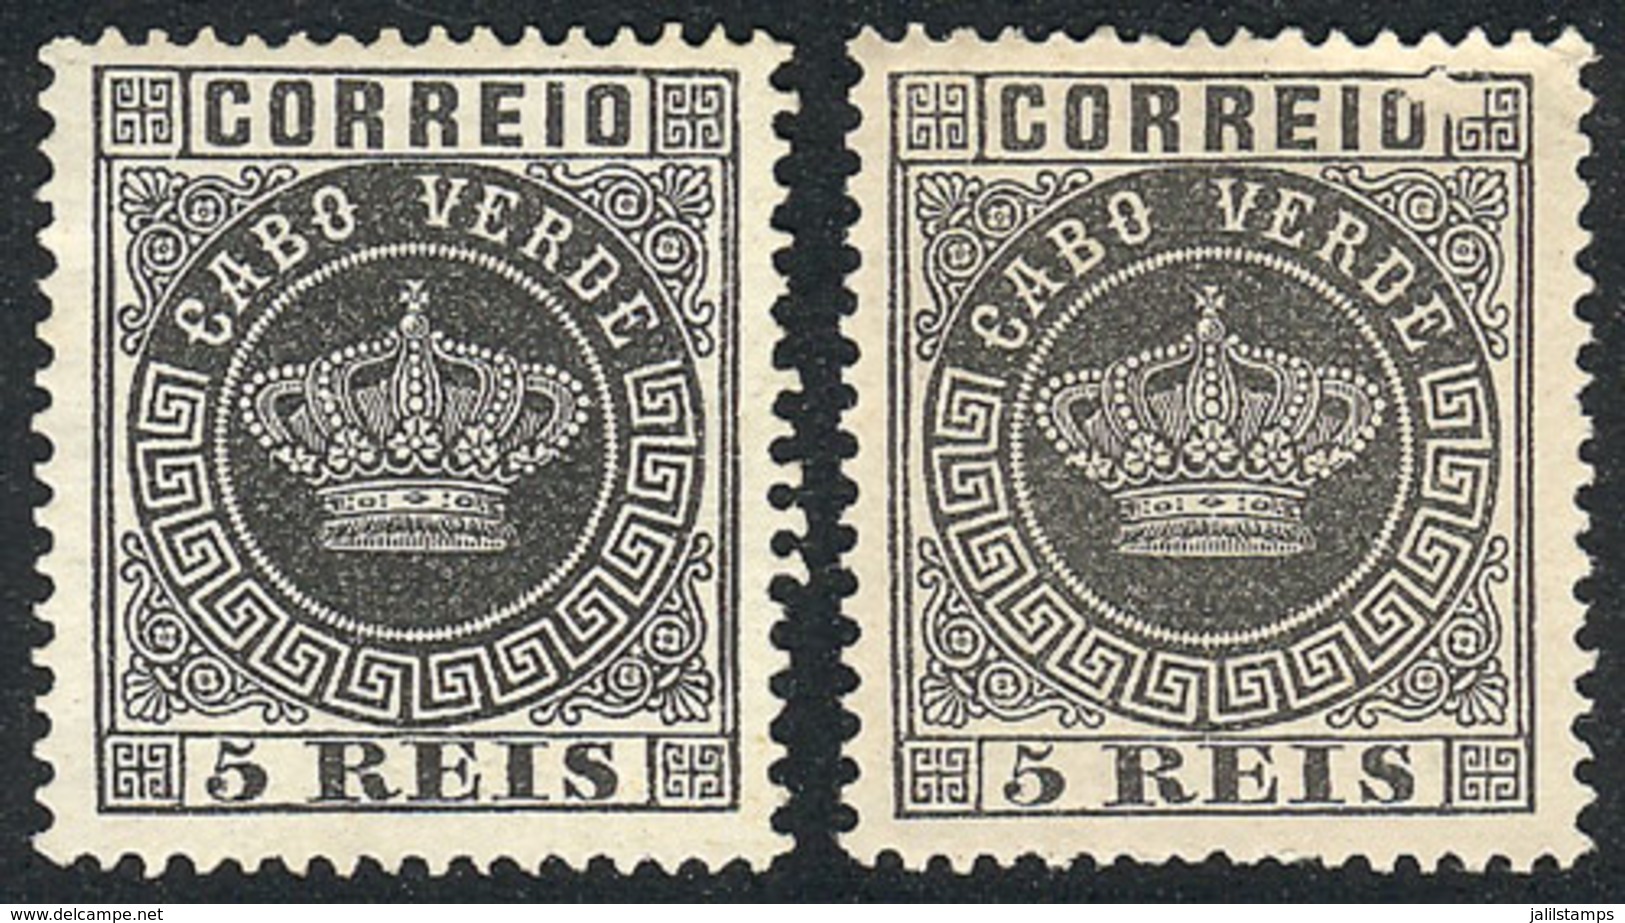 CAPE VERDE: Sc.1, 2 Examples Mint Without Gum, One With VARIETY: Printing Flaw Over The O Of "CORREIO", Interesting!" - Cape Verde